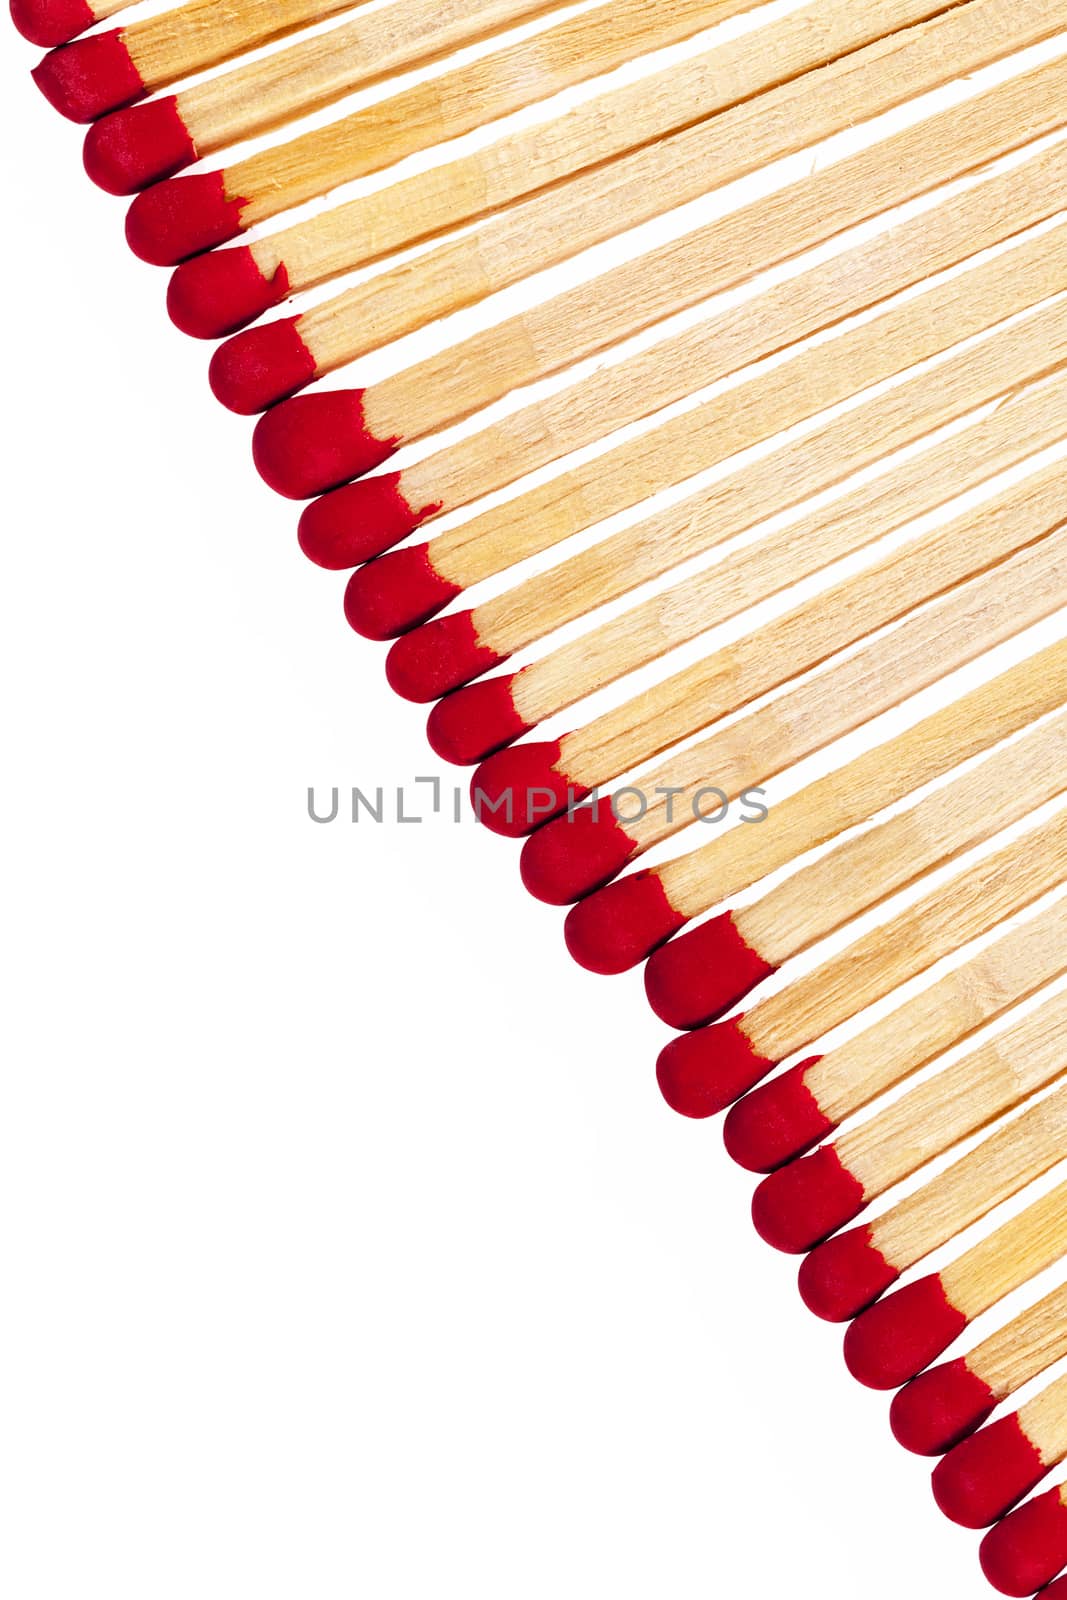 composition of matches with rad heads isolated on white background by mychadre77